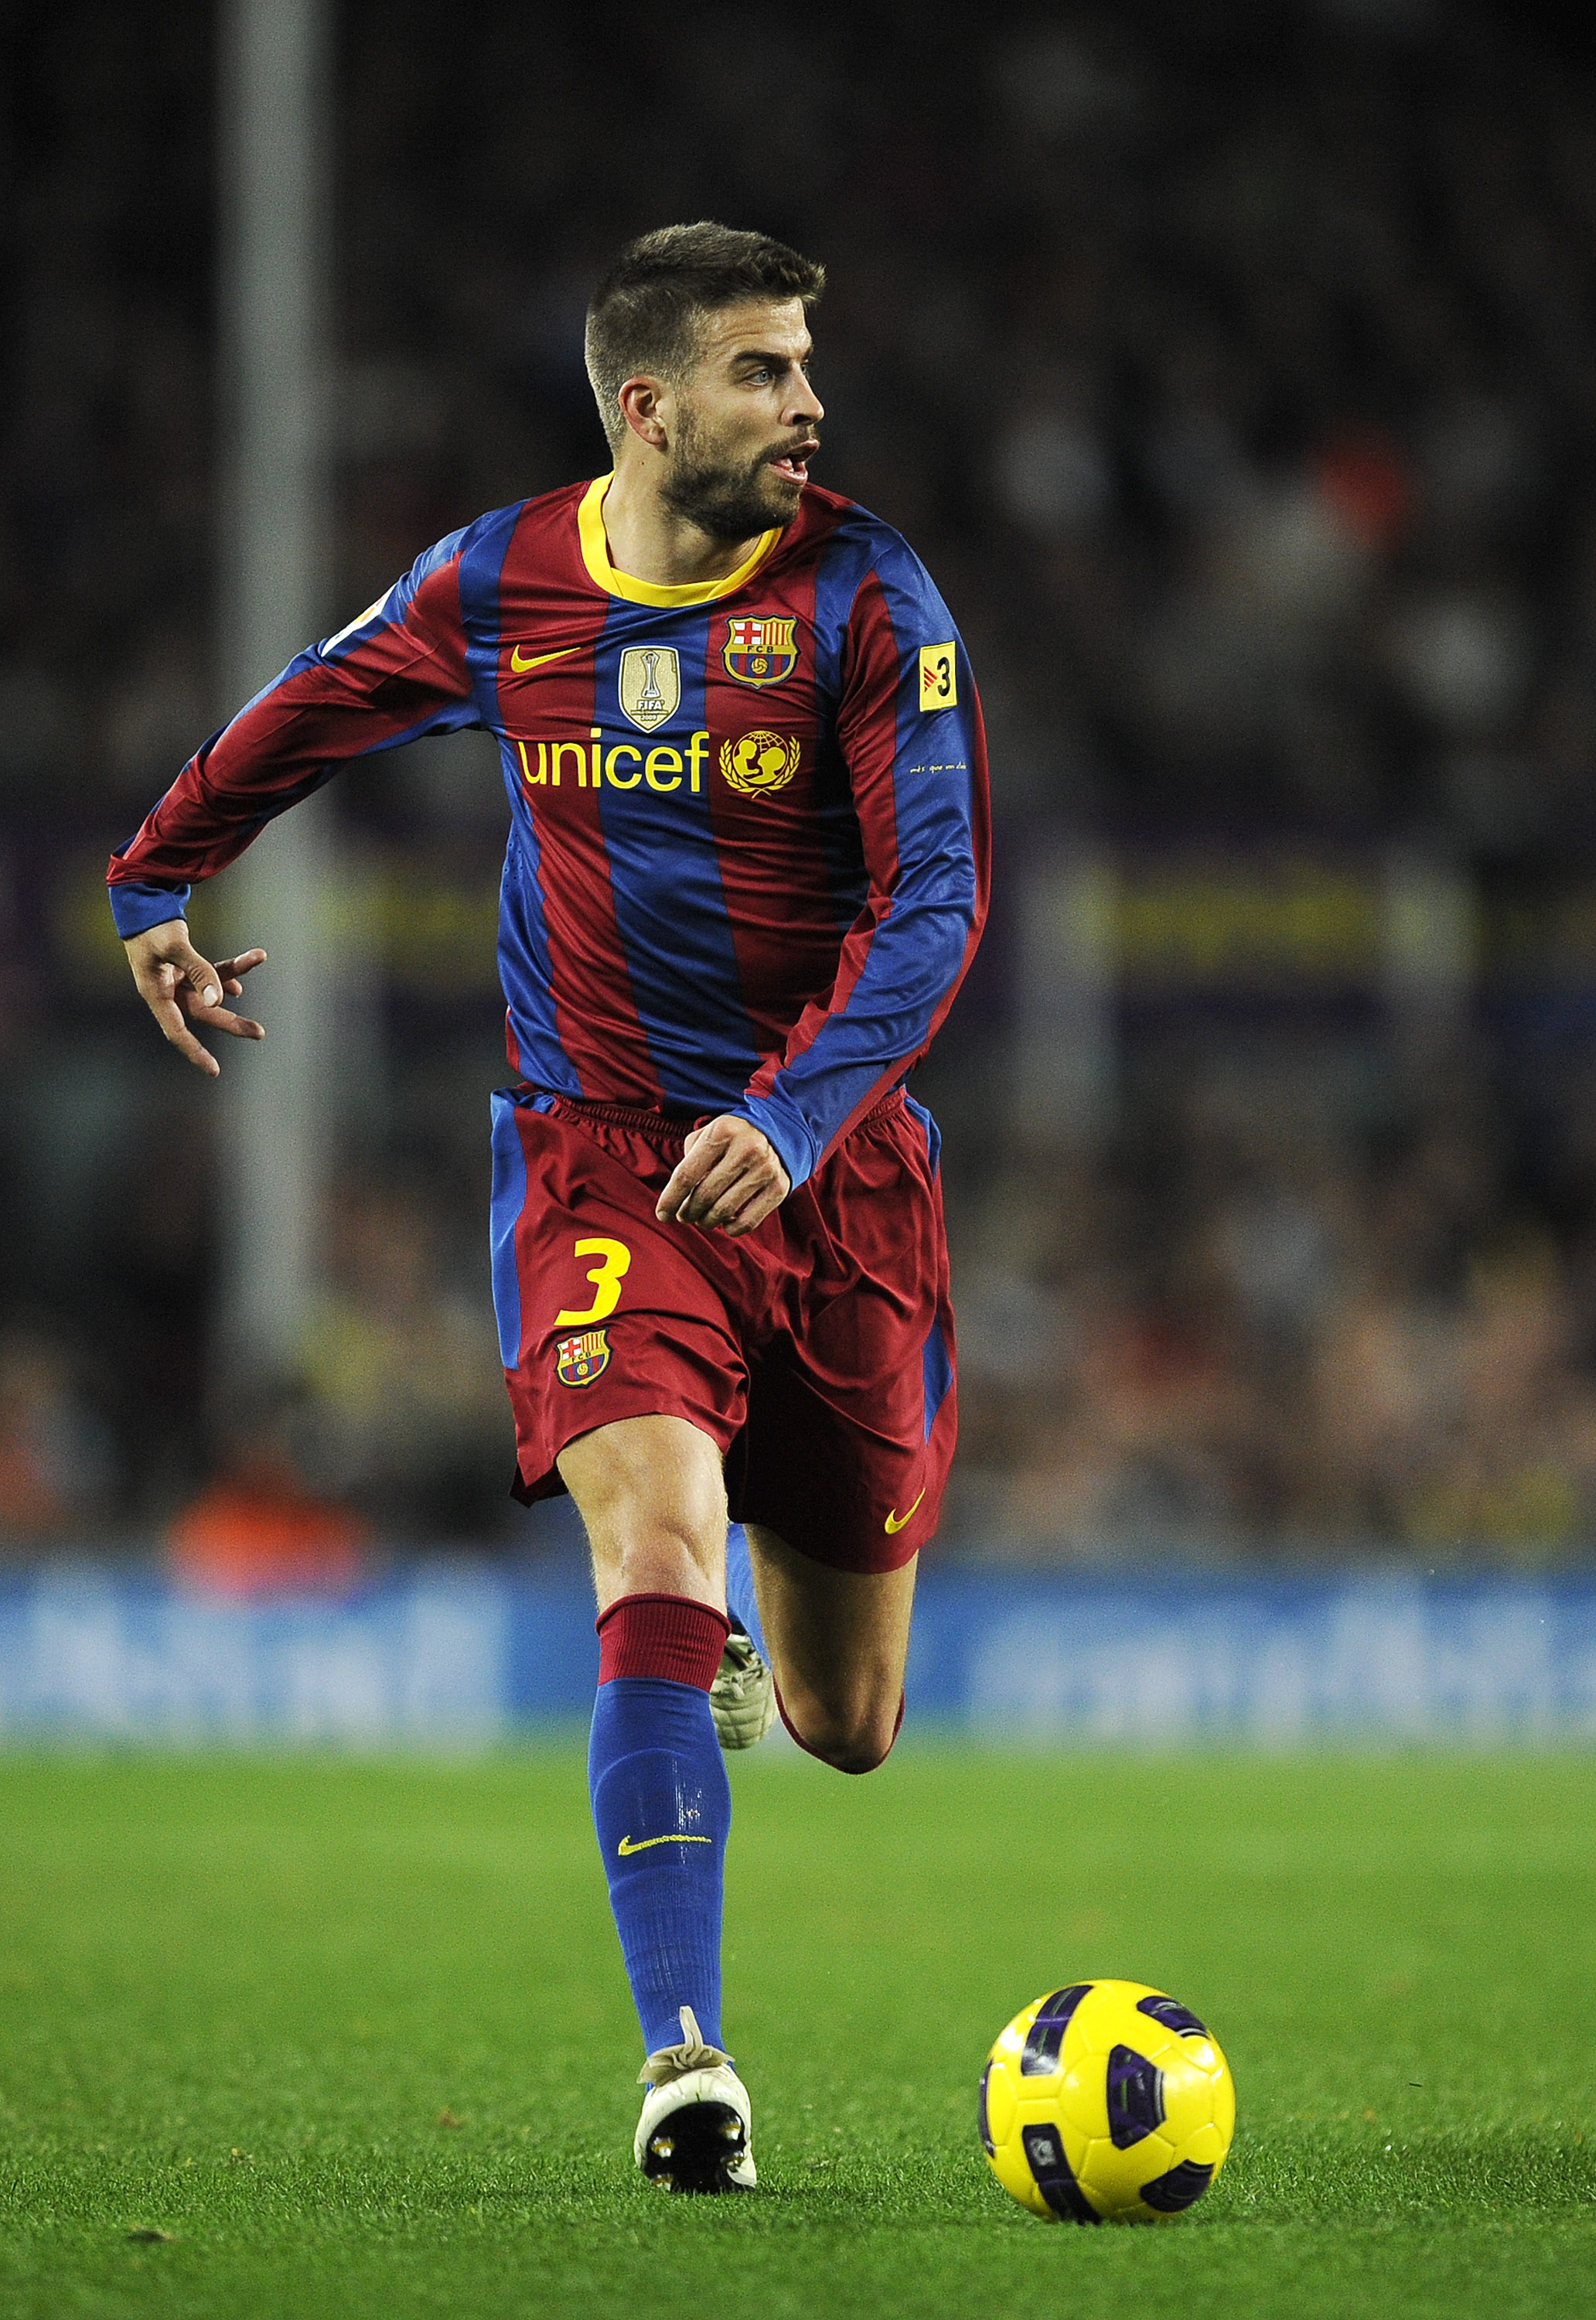 BARCELONA, SPAIN - OCTOBER 30:  Gerard Pique of Barcelona runs with the ball during the La Liga match between Barcelona and Sevilla FC on October 30, 2010 in Barcelona, Spain. Barcelona won the match 5-0.  (Photo by David Ramos/Getty Images)